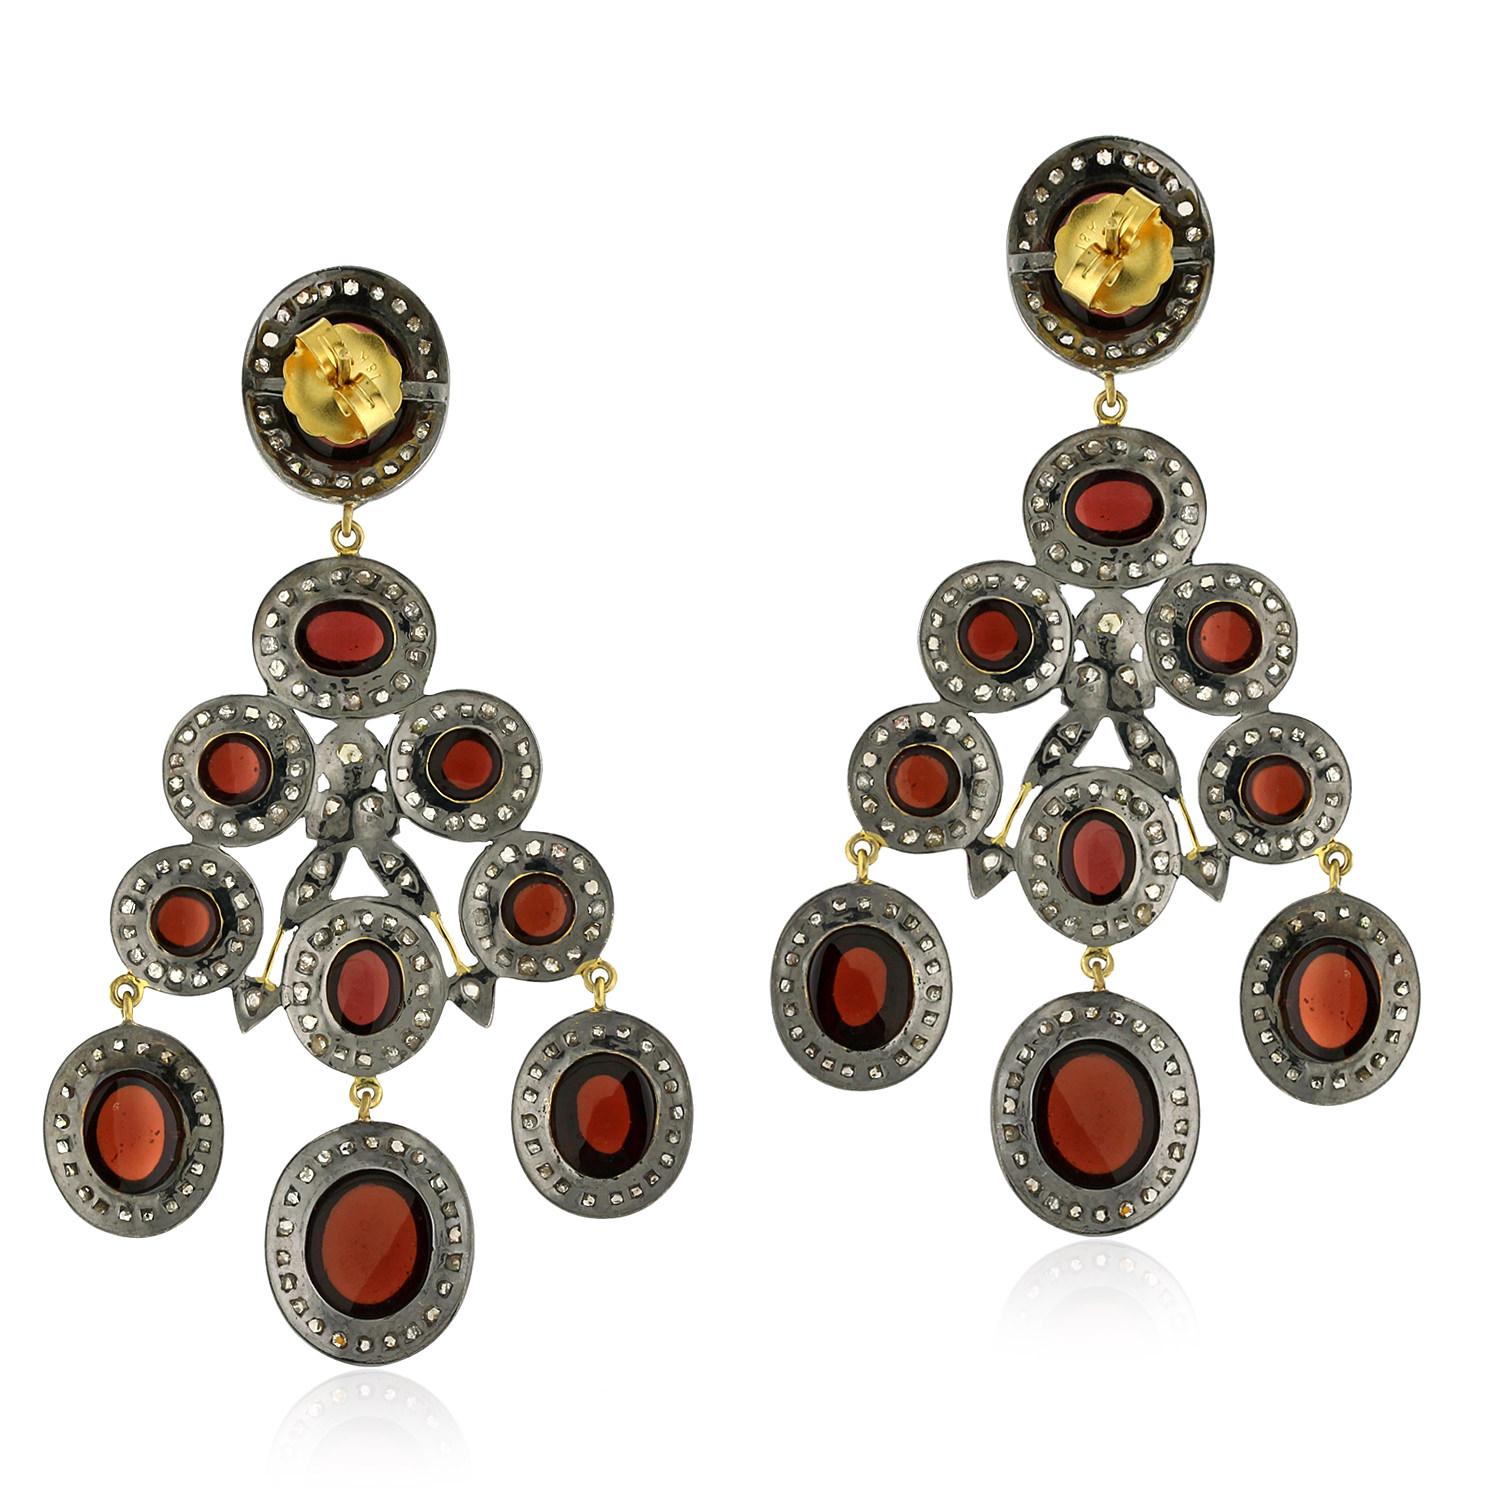 This designer Chandelier Cabochon Garnet and diamond Earring in Gold and Silver is lovely and very charming.

18kt gold:9.17gms
Diamond:7.28ct
Silver:11.73gms
Garnet:54.10cts
